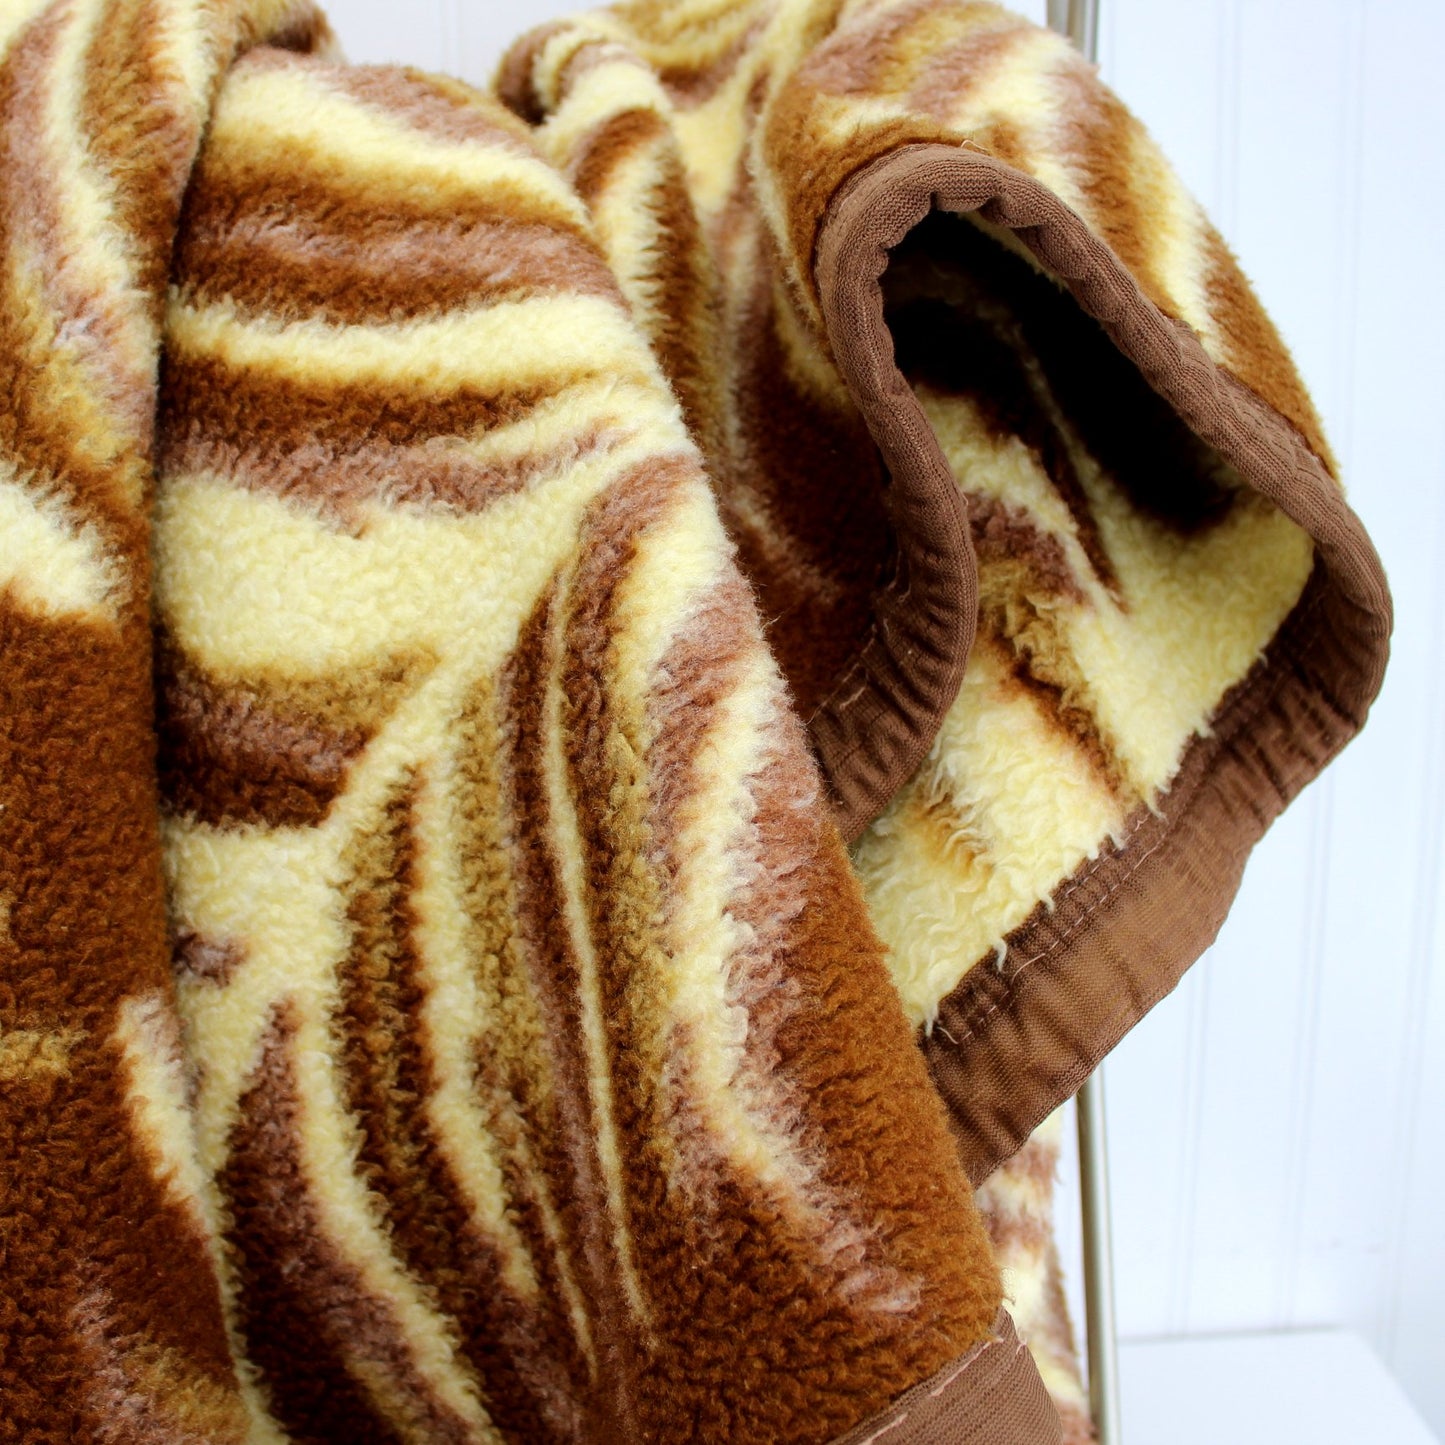 Heavy Poly Acrylic Blanket Large Fern Leaves Shades of Brown Cream 90" X 77" nice colors well cared blanket